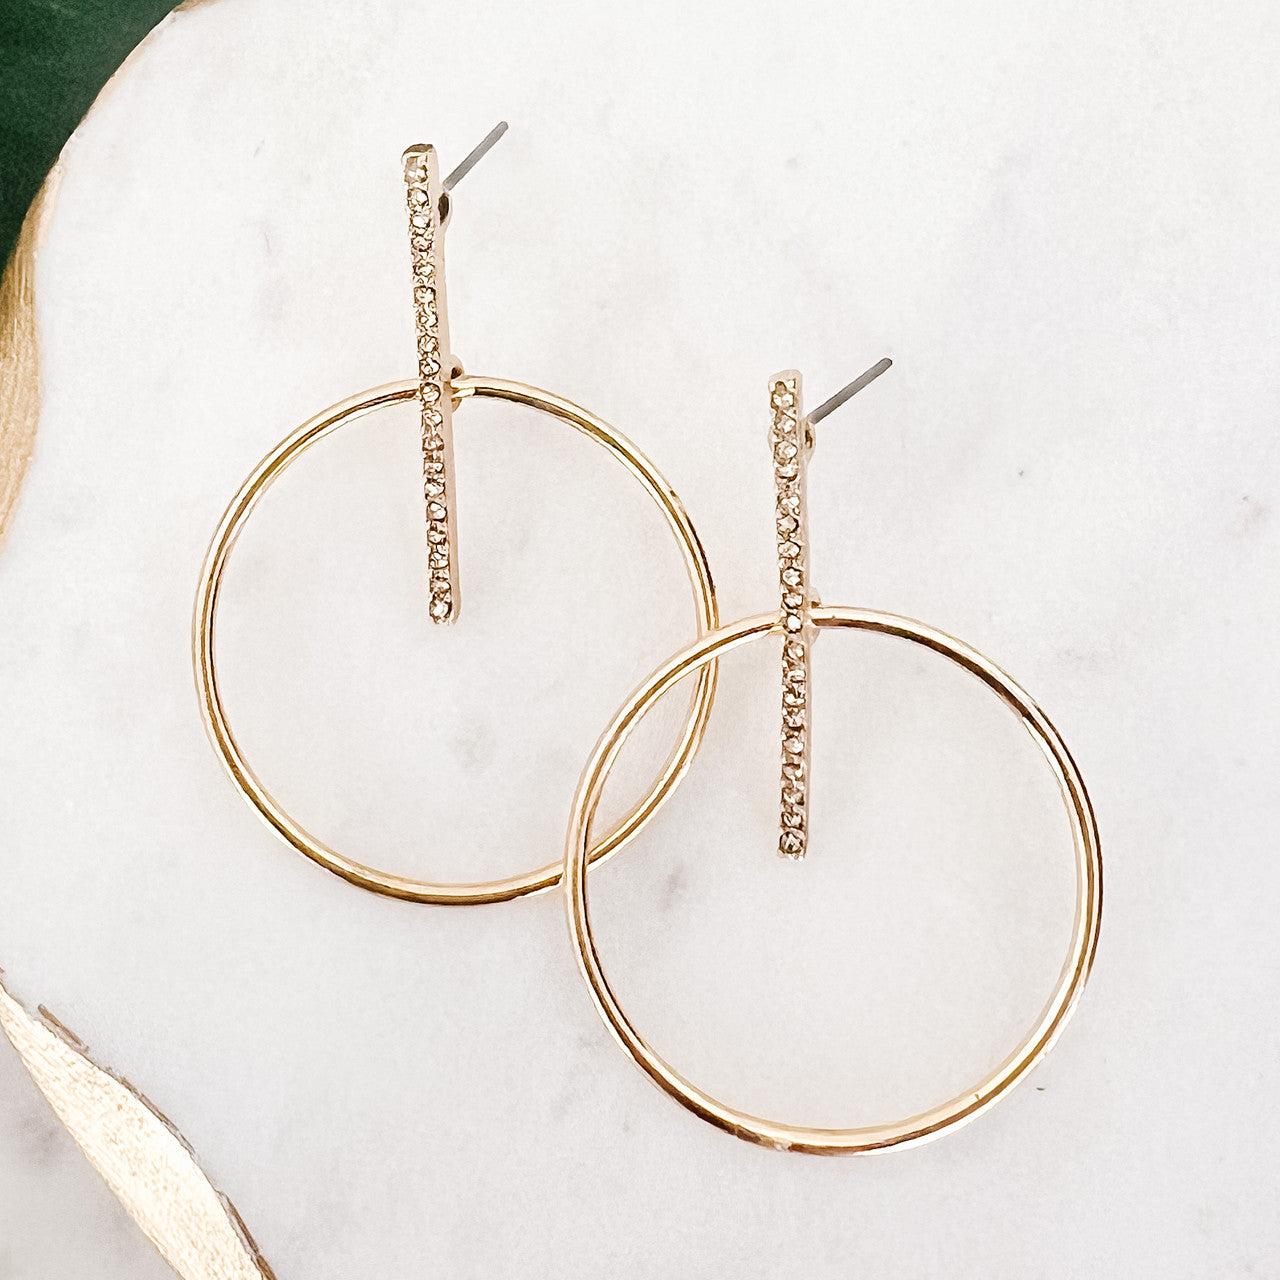 Gold Ring & Pave Bar Earrings